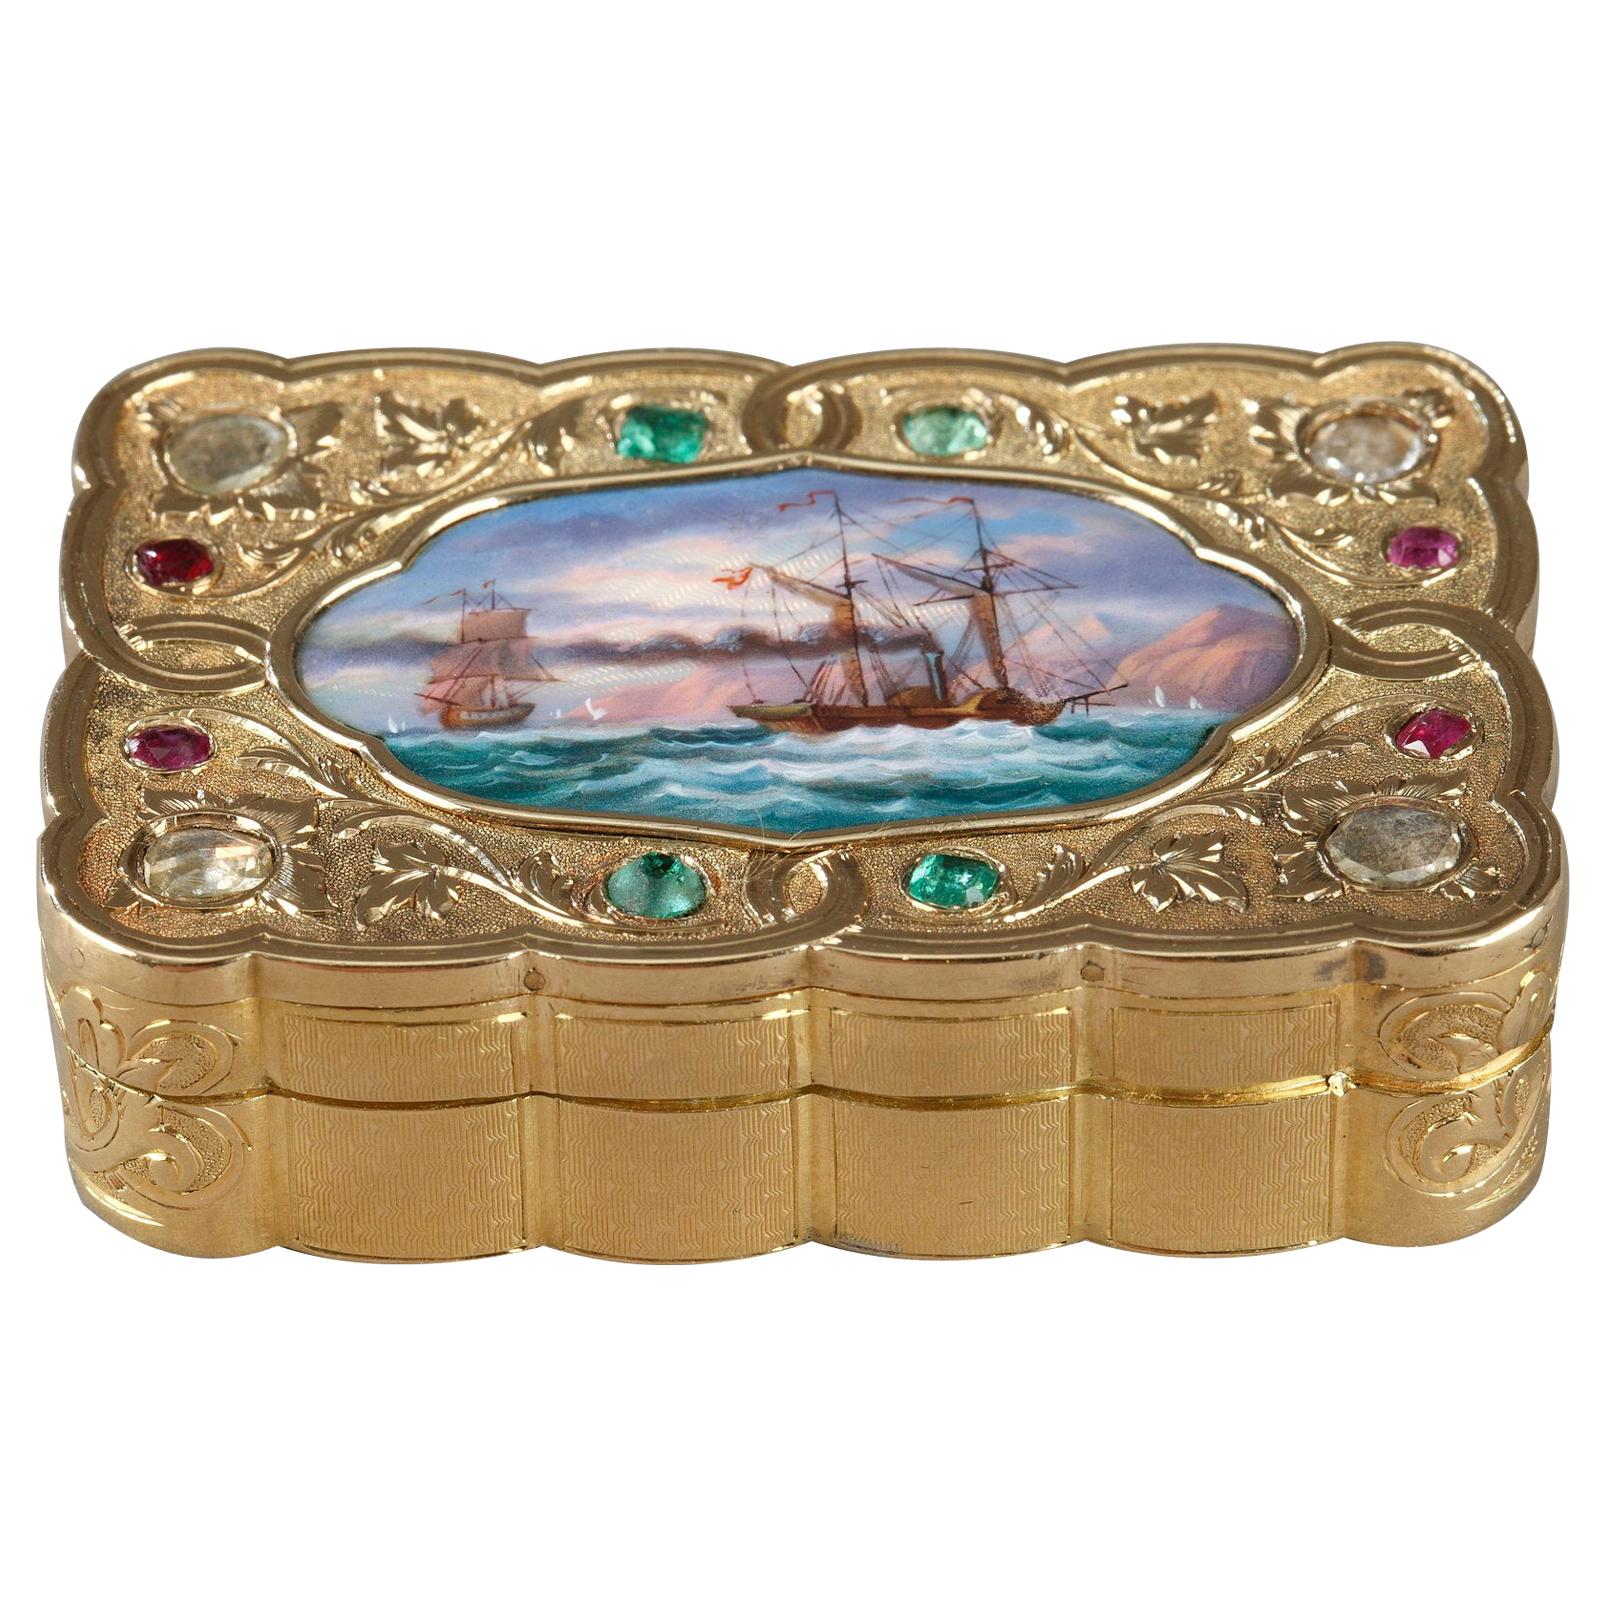 Swiss Enamelled Gold Snuff-Box for the Oriental Market, circa 1820-1830